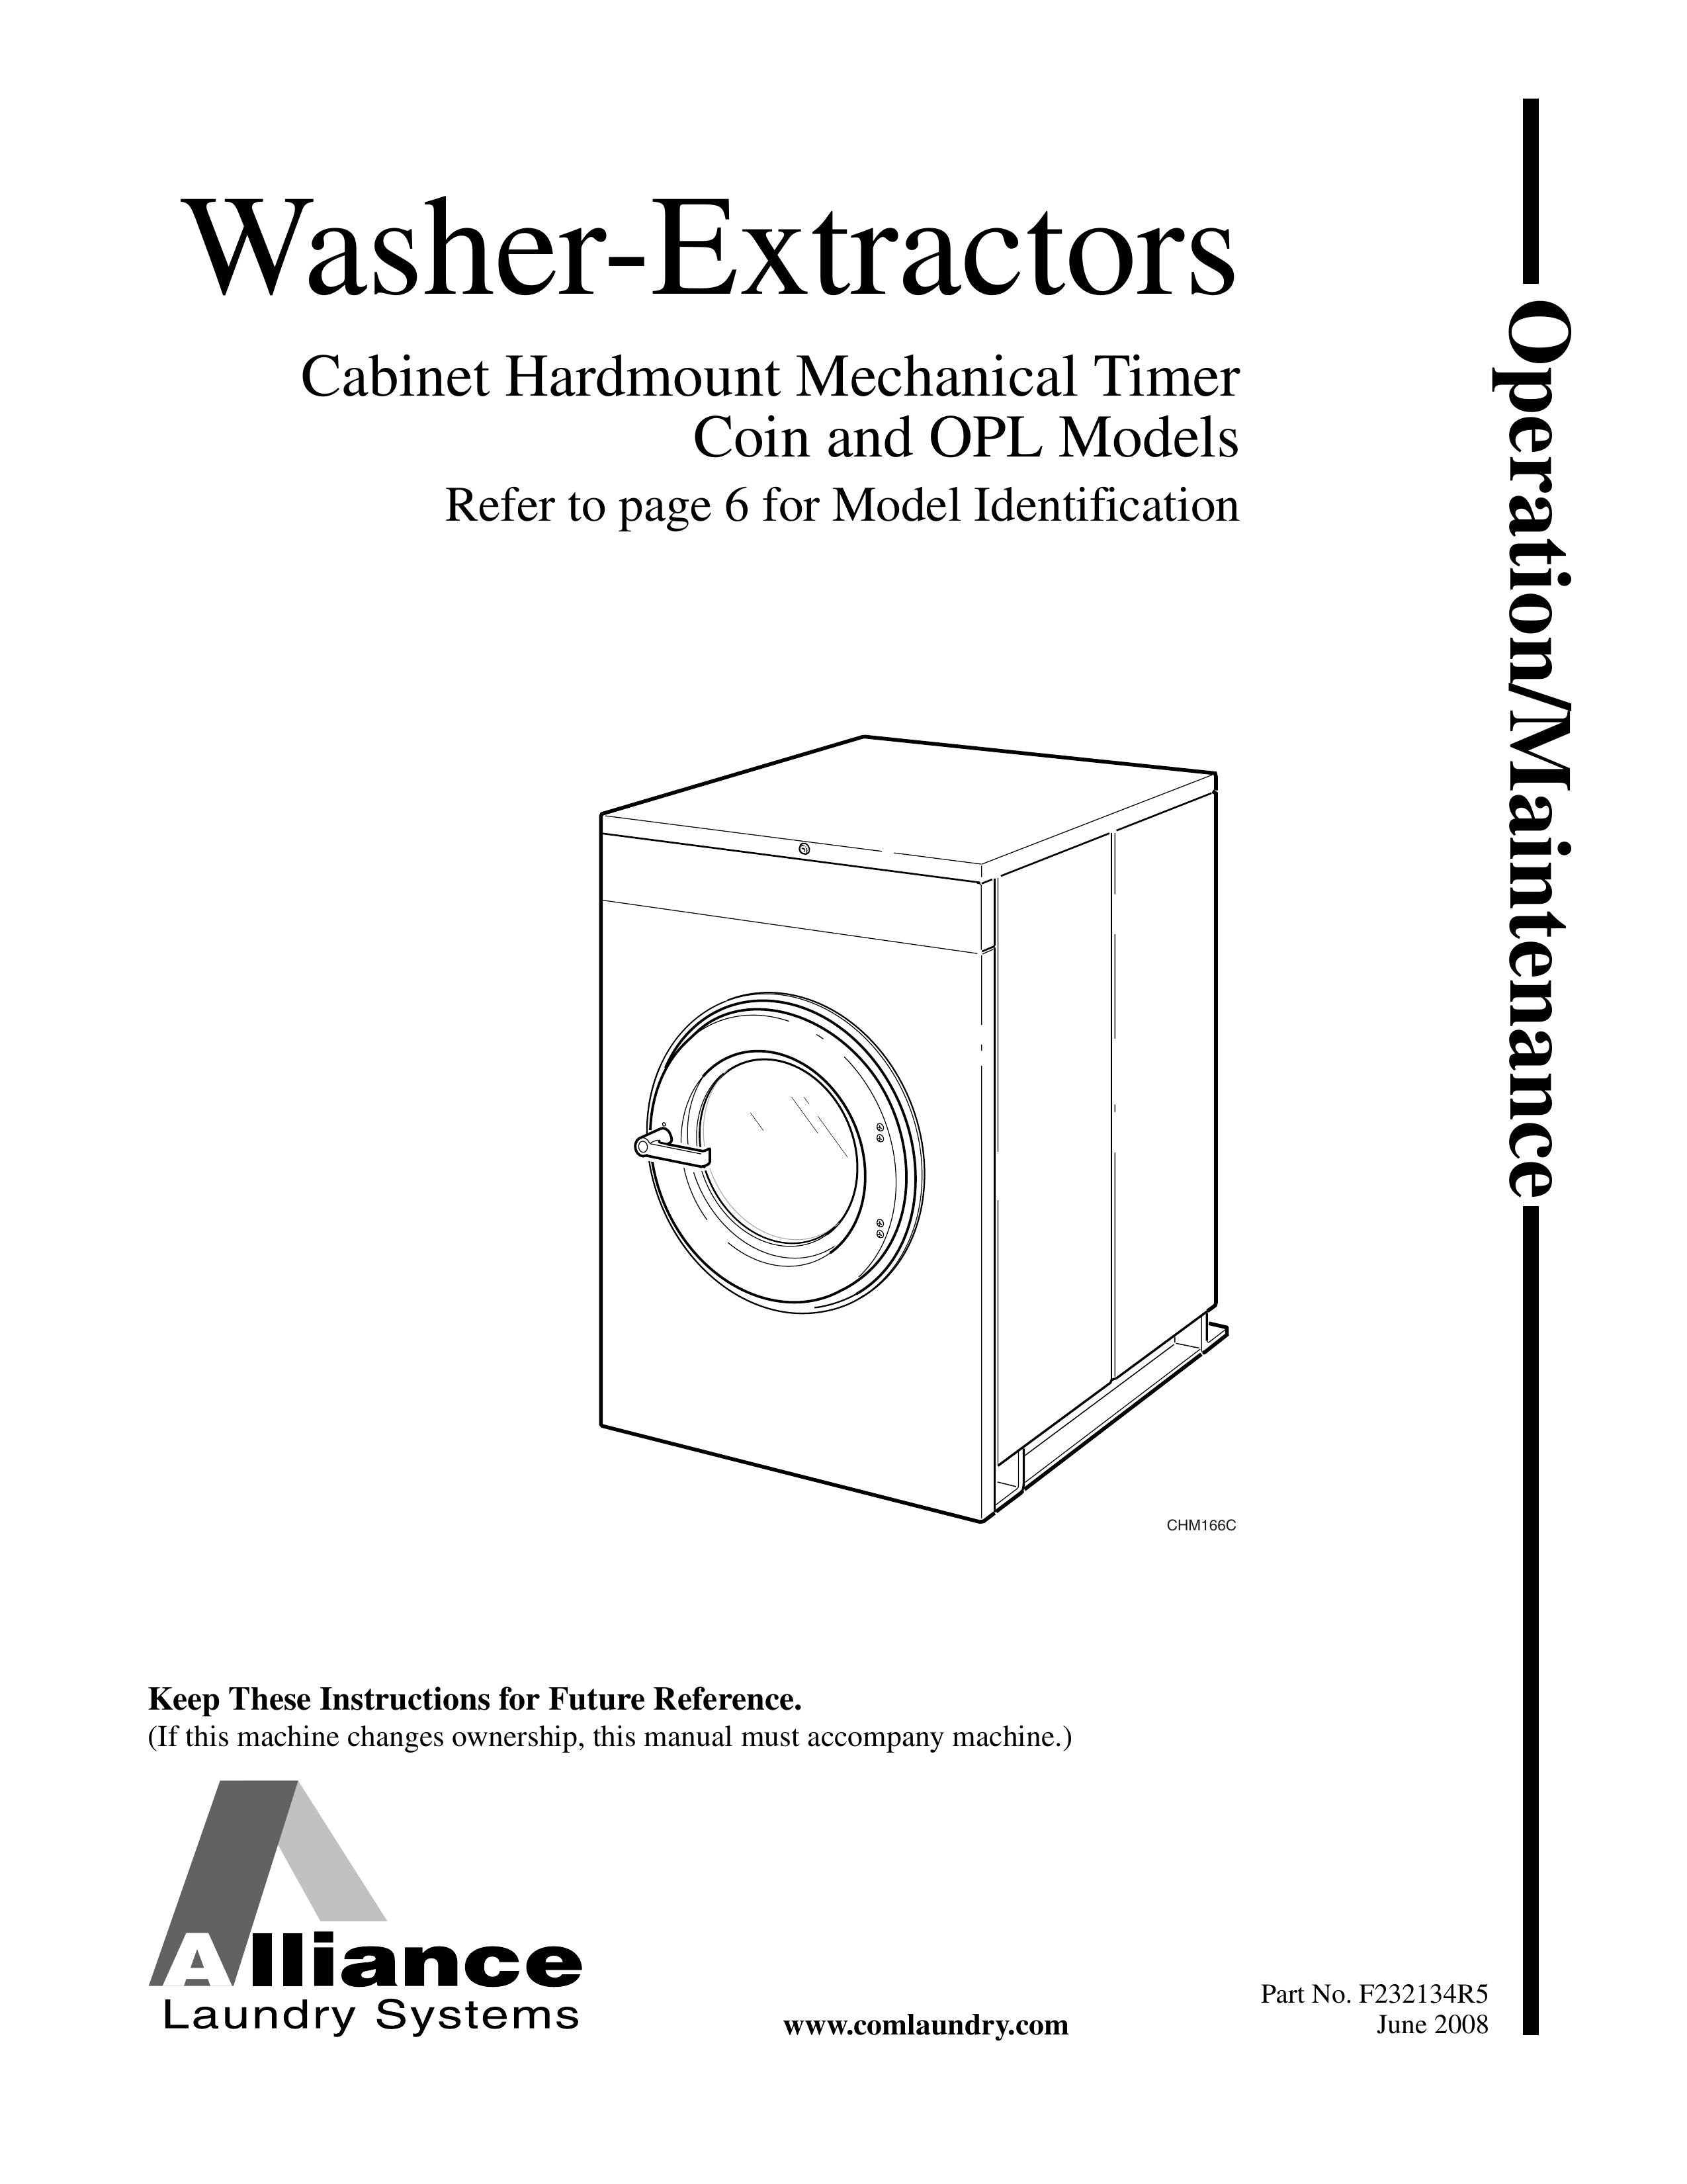 Alliance Laundry Systems Coin and OPL Washer User Manual